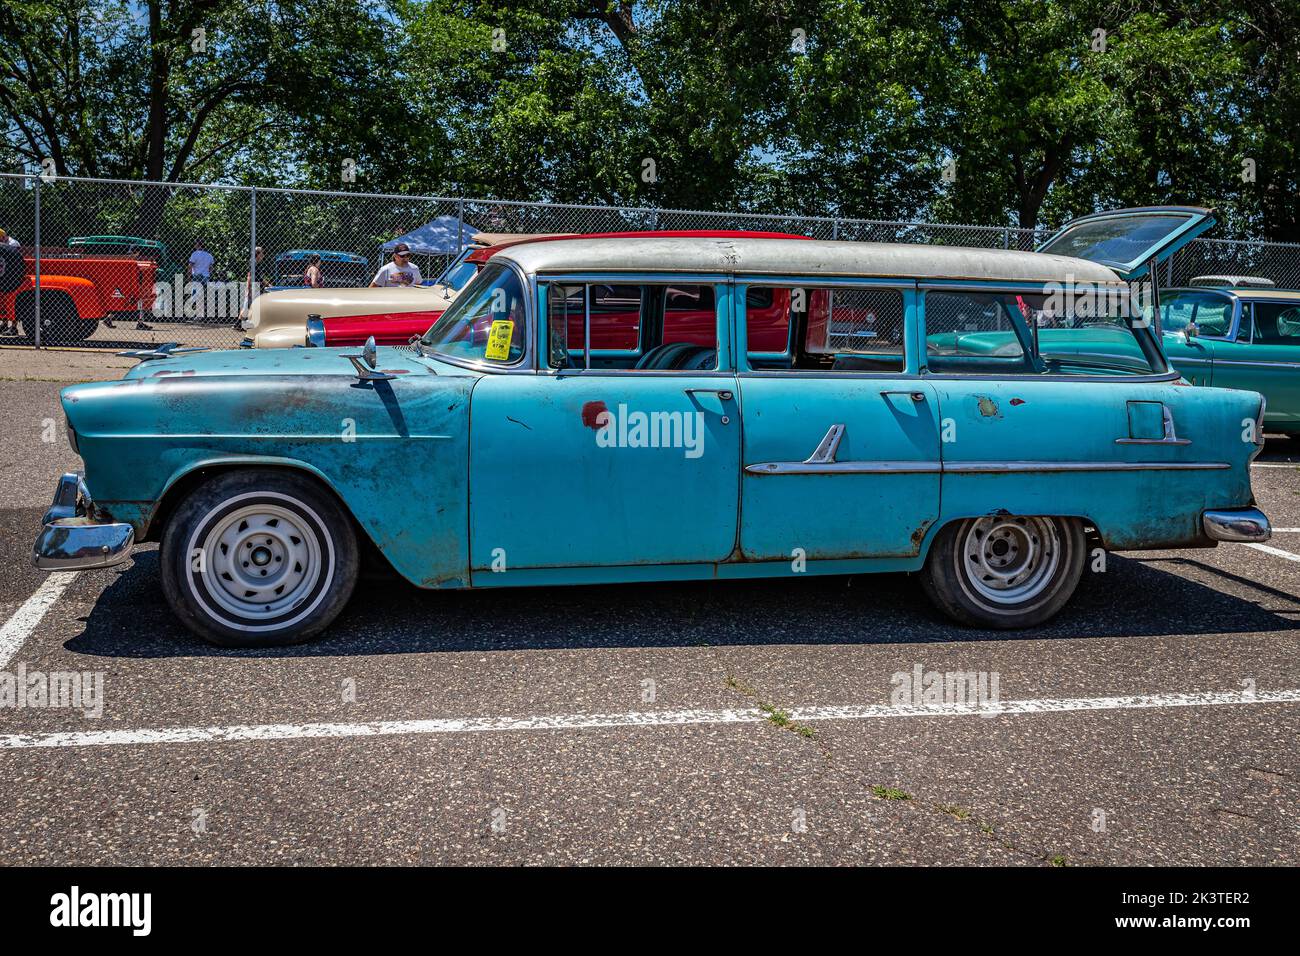 Falcon Heights, MN - June 18, 2022: High perspective side view of a 1955 Chevrolet BelAir Station Wagon at a local car show. Stock Photo